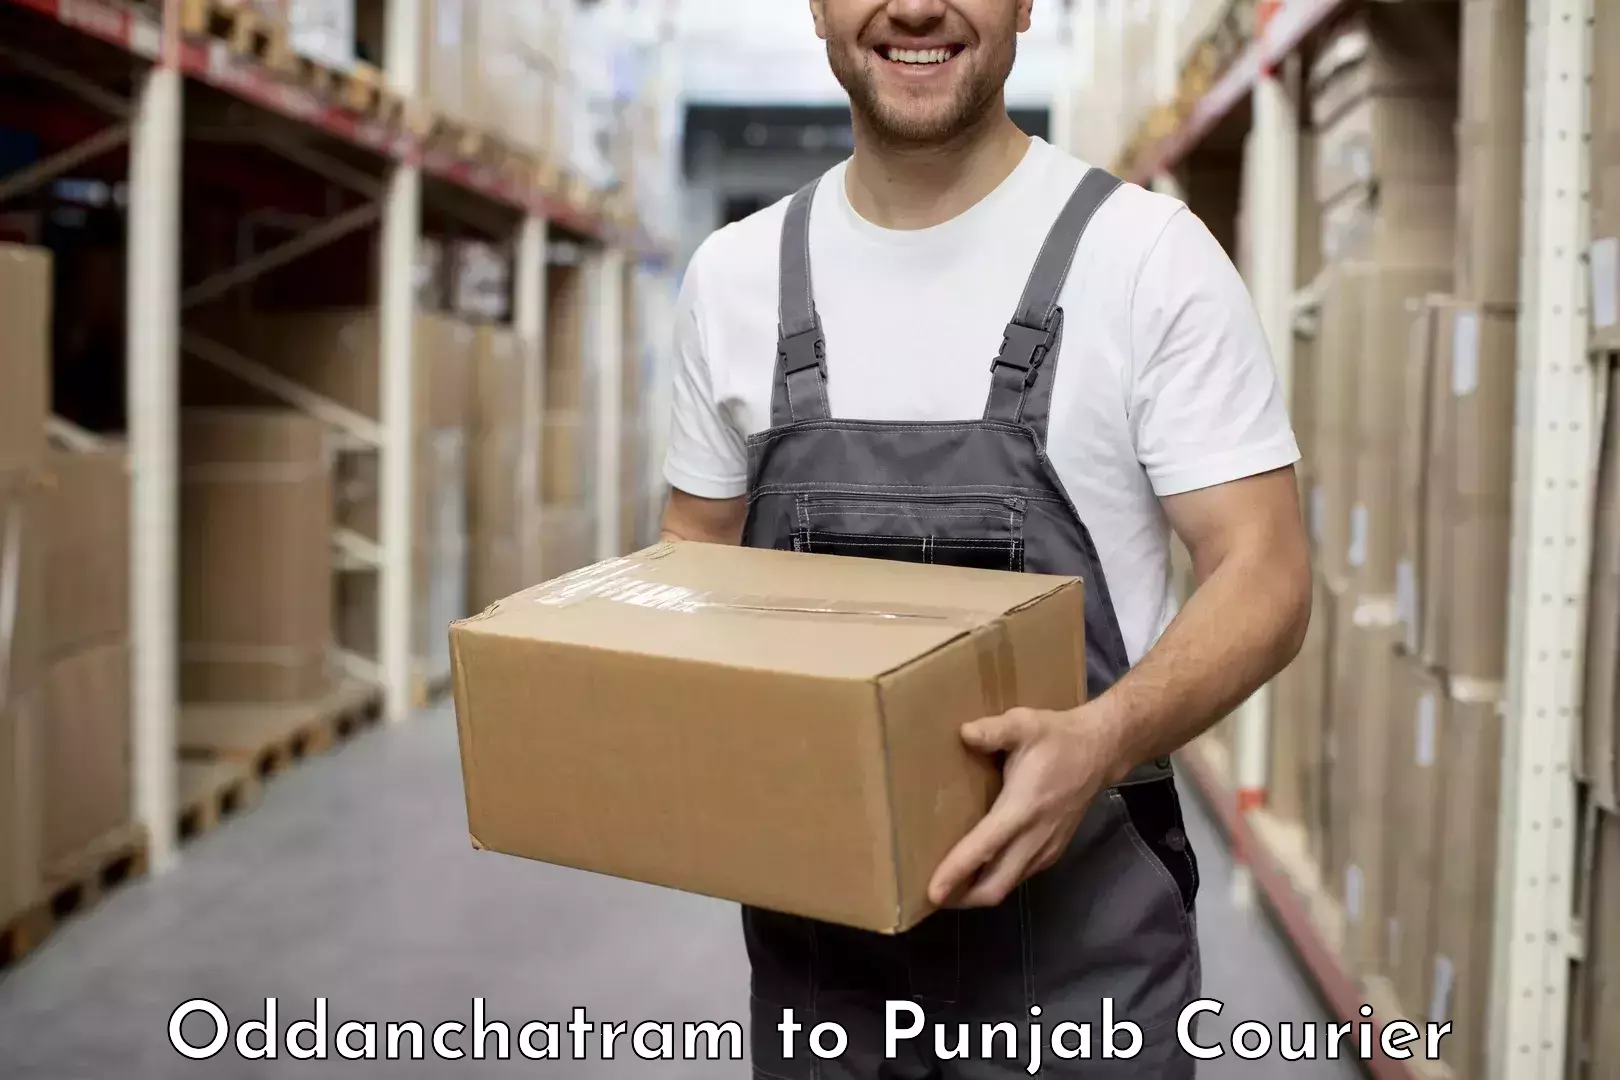 Express courier capabilities Oddanchatram to Punjab